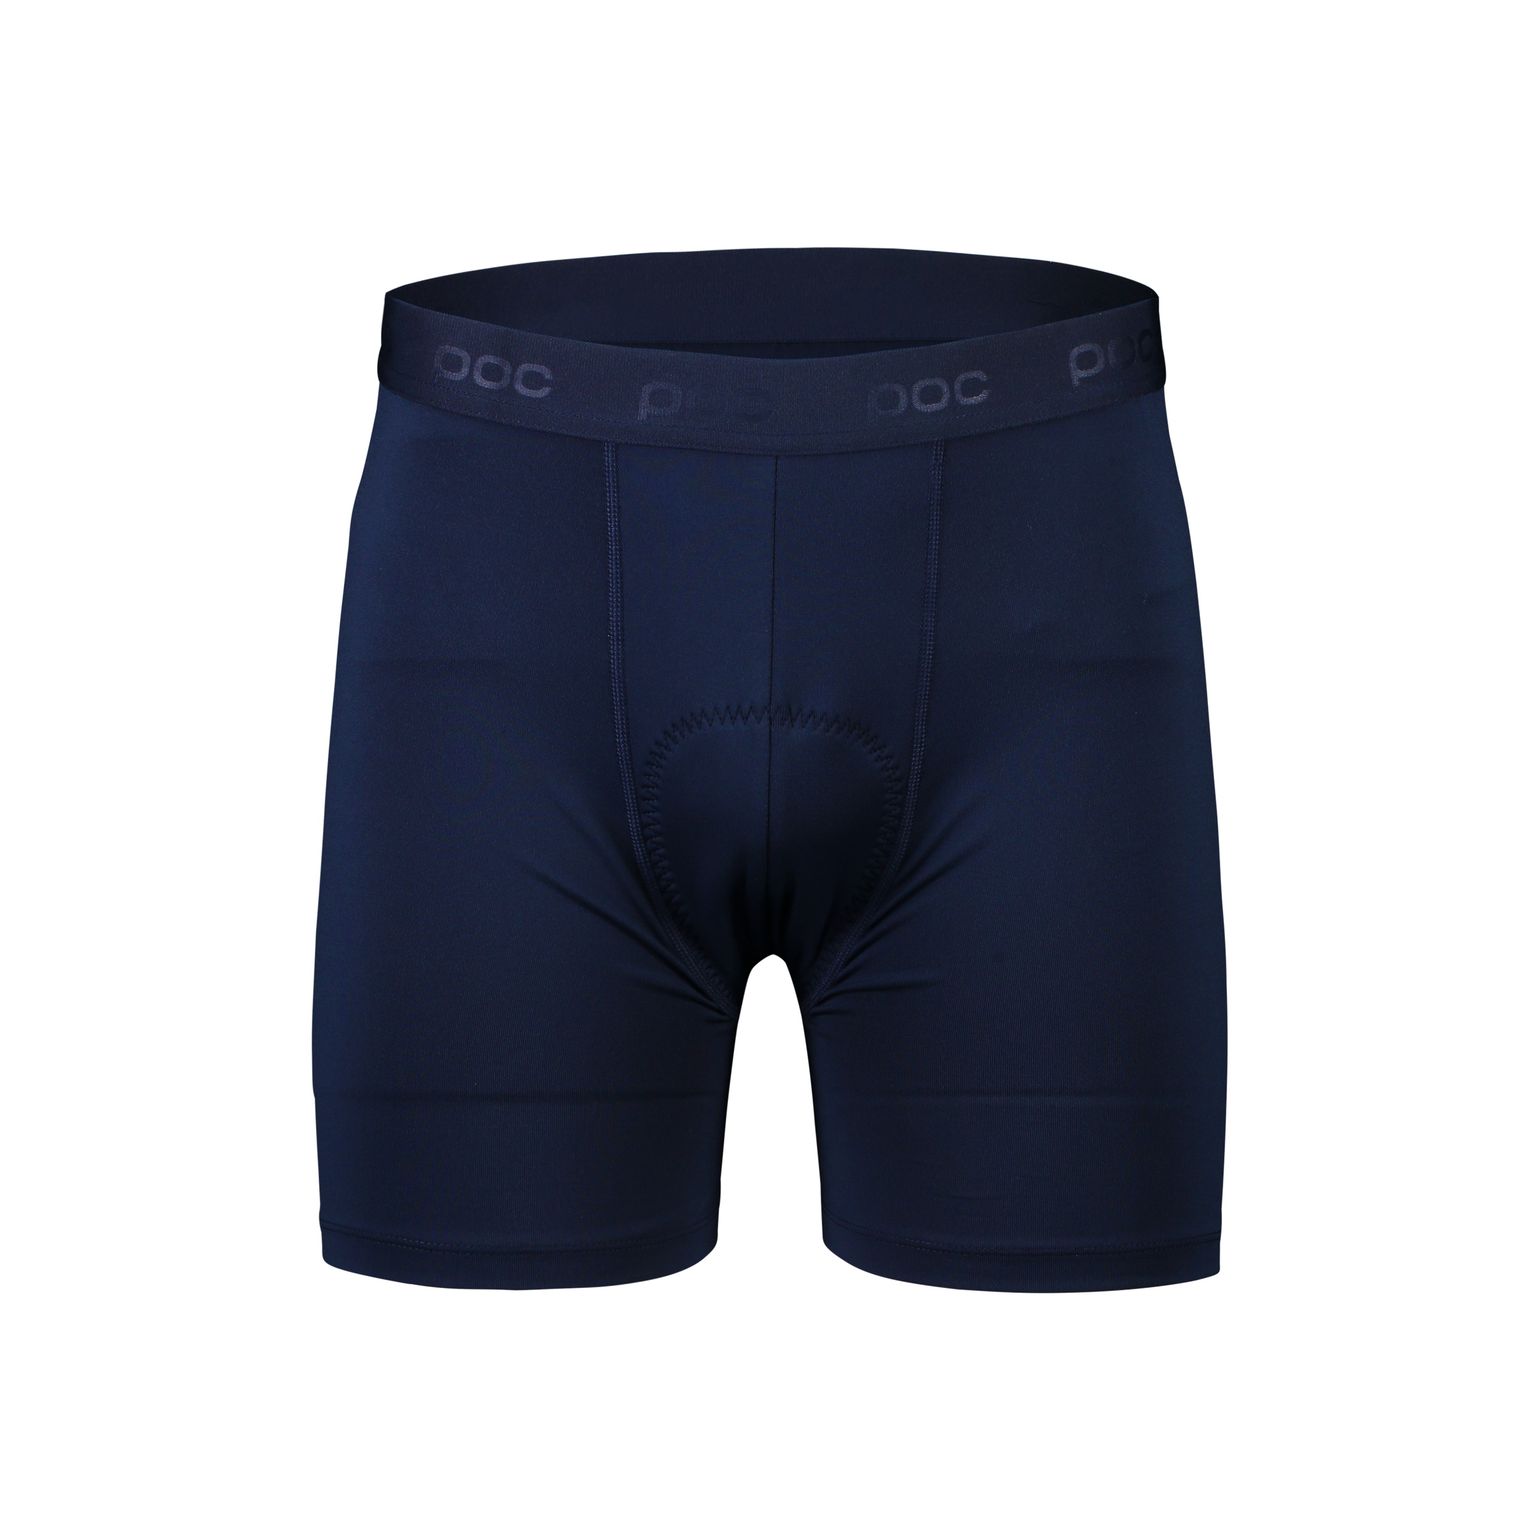 Re-cycle Boxer Turmaline Navy